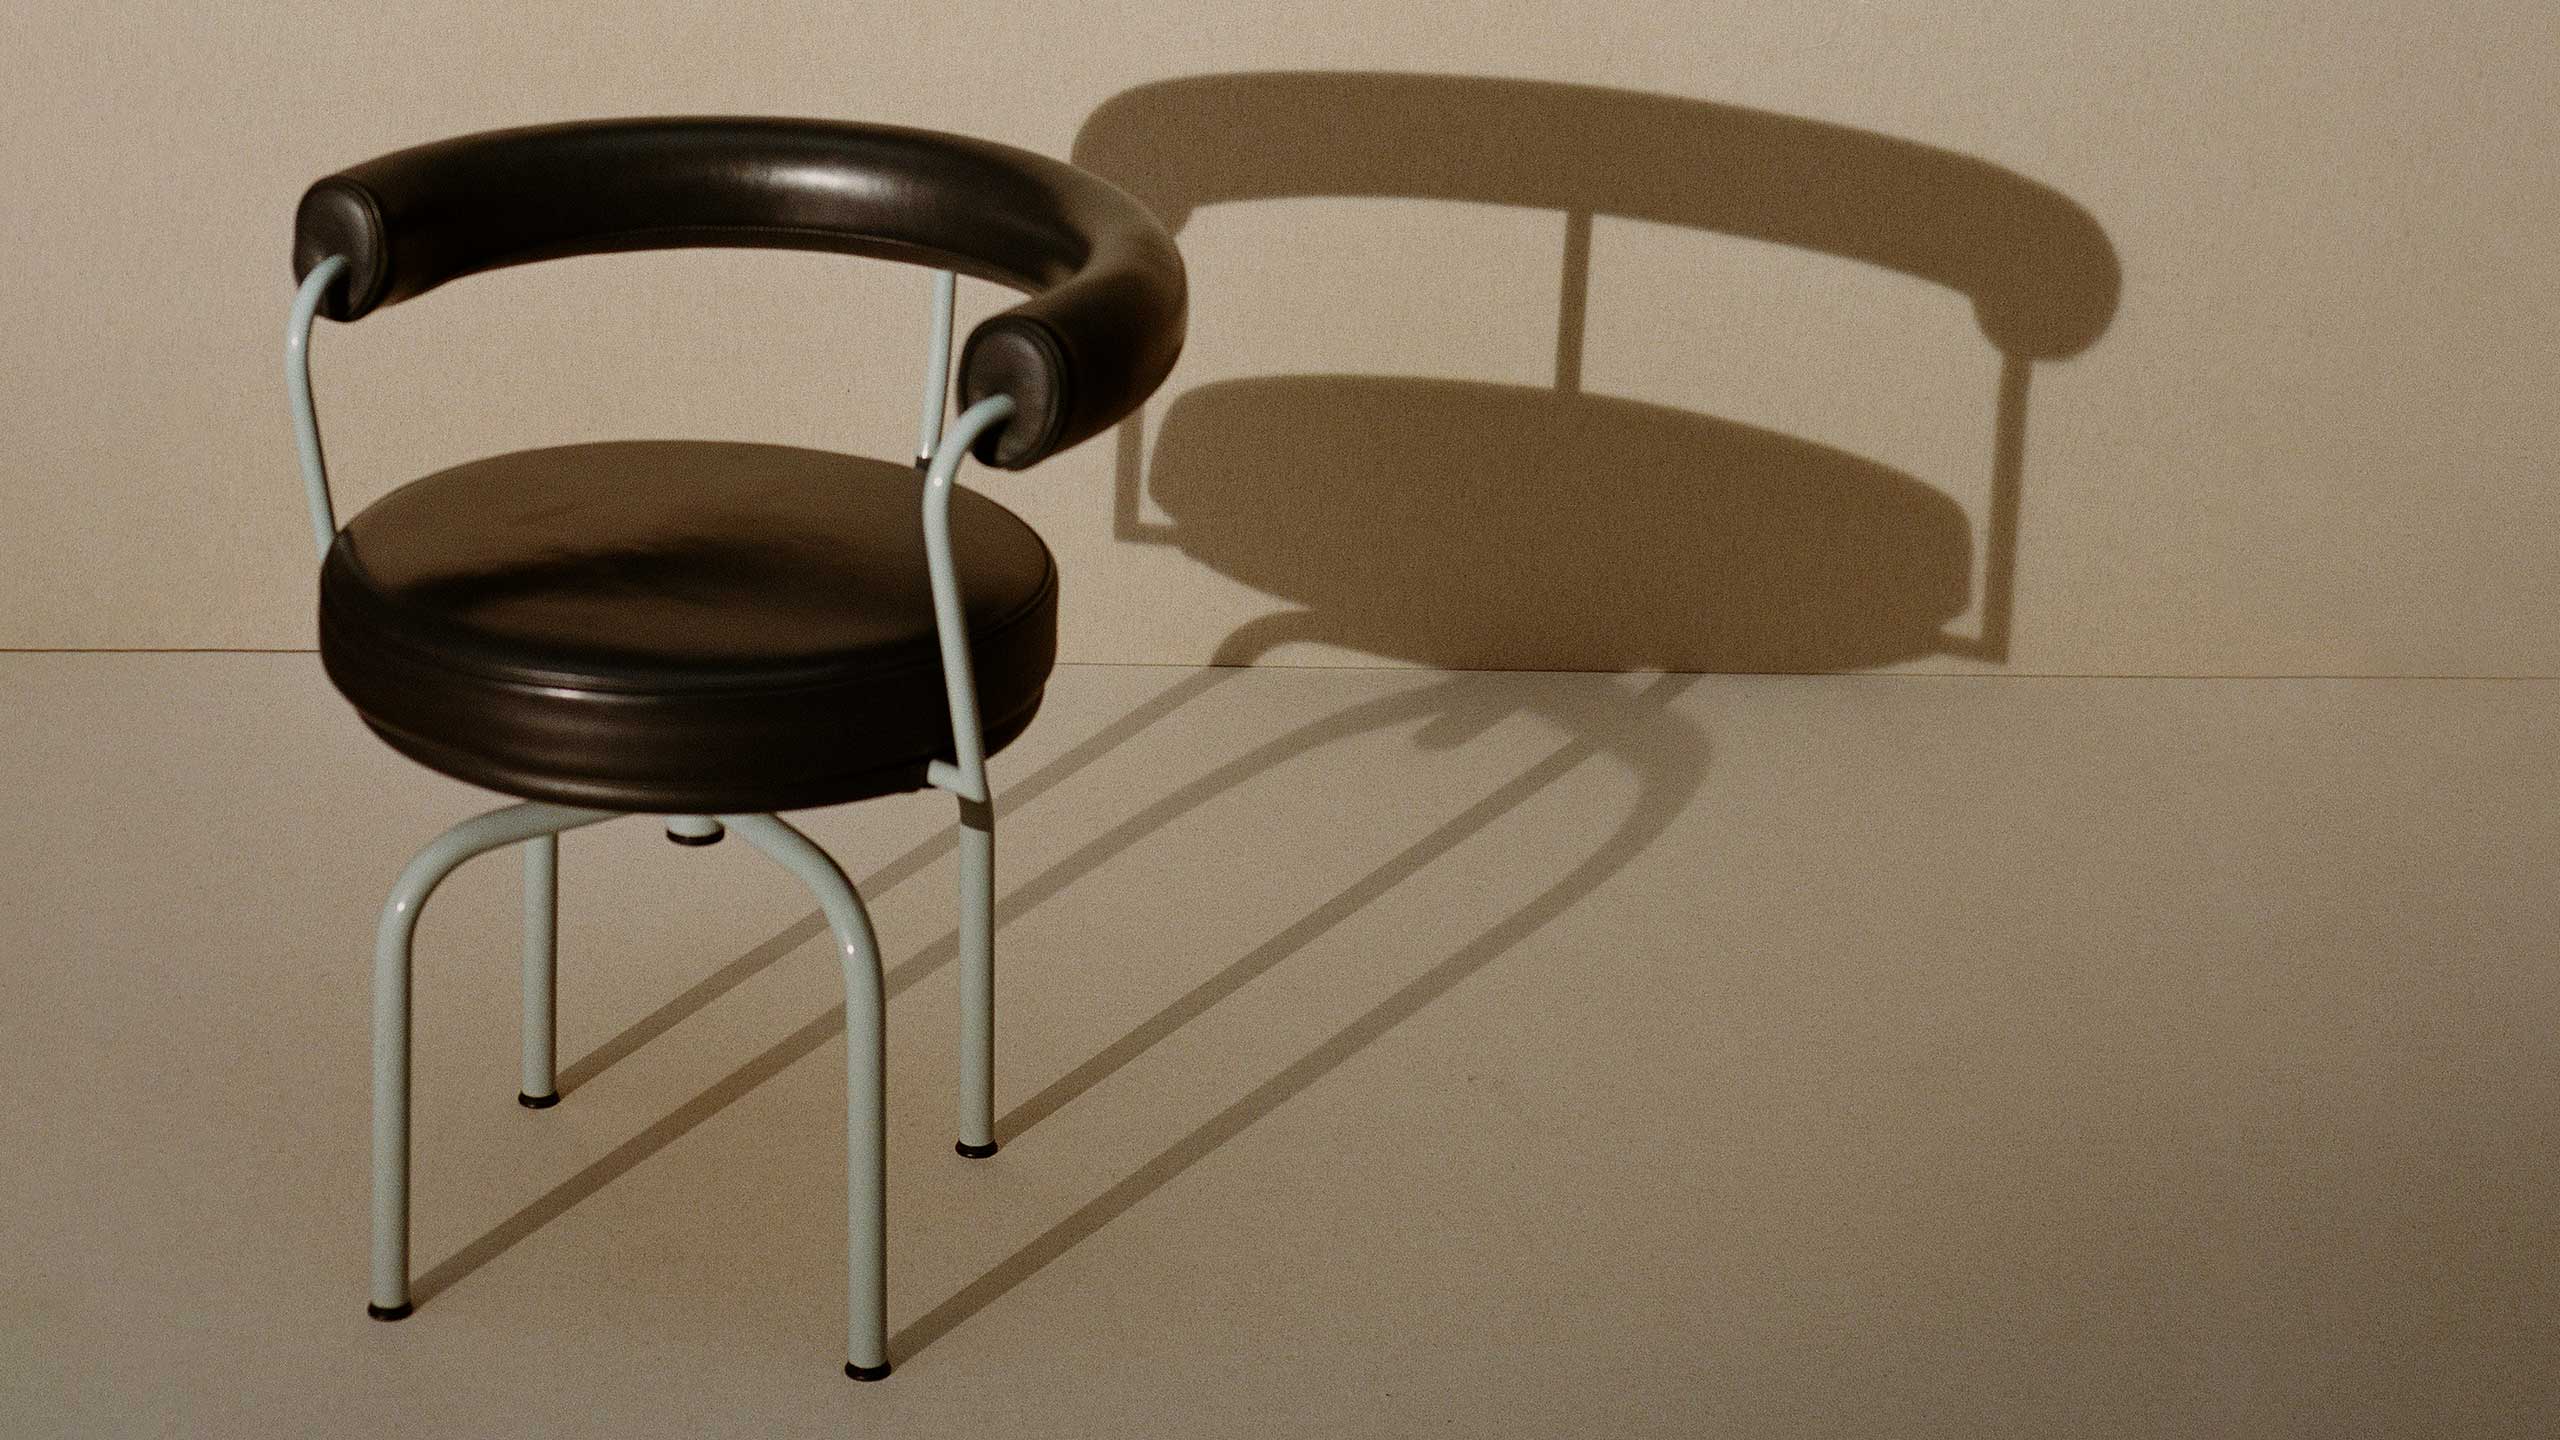 A modernist chair designed by Charlotte Perriand.